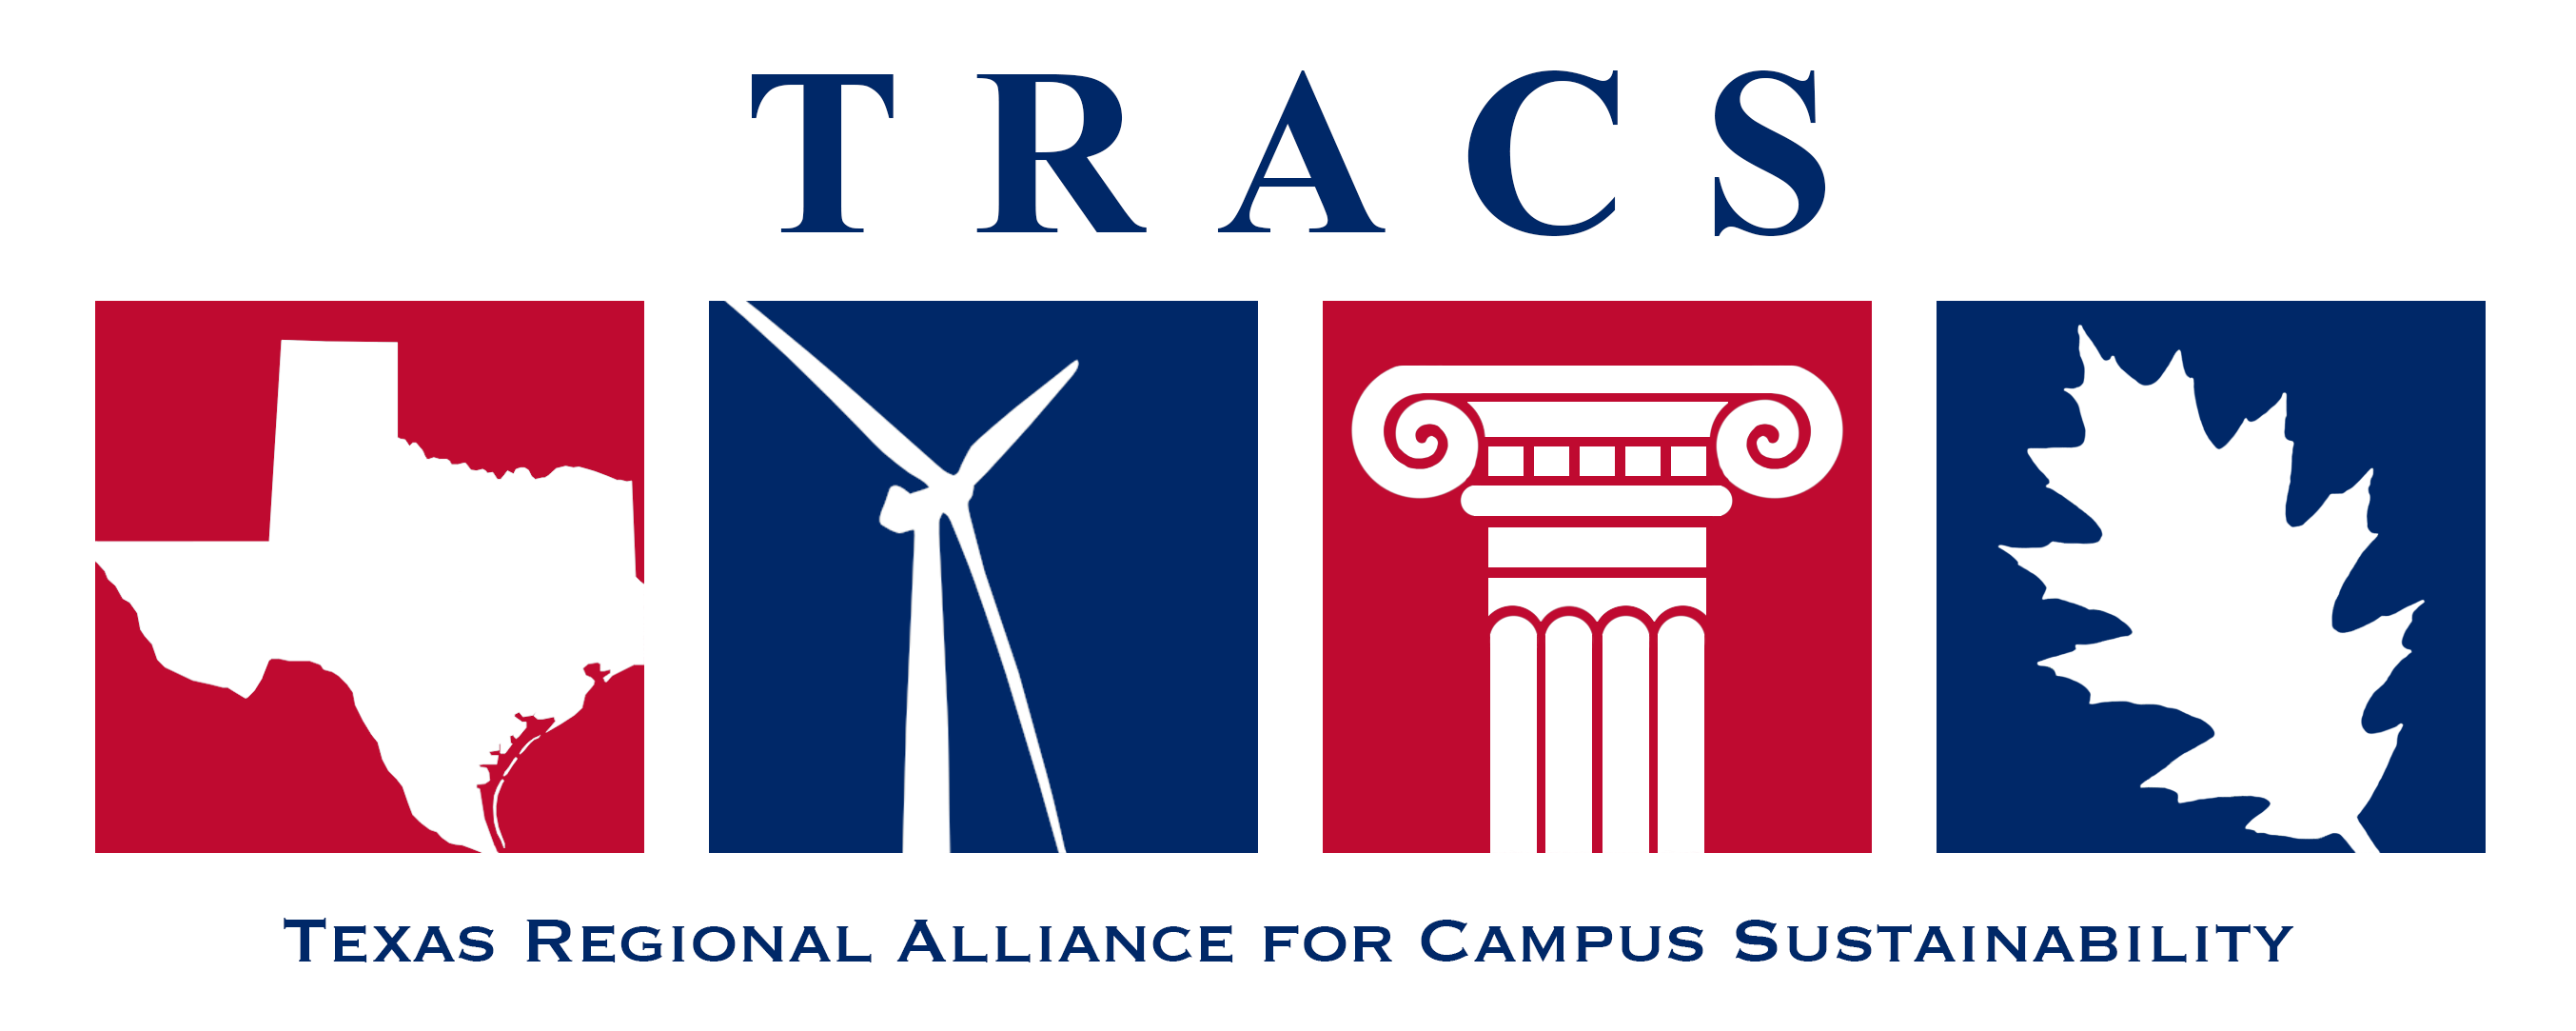 logo image for Texas Regional Alliance for Campus Sustainability